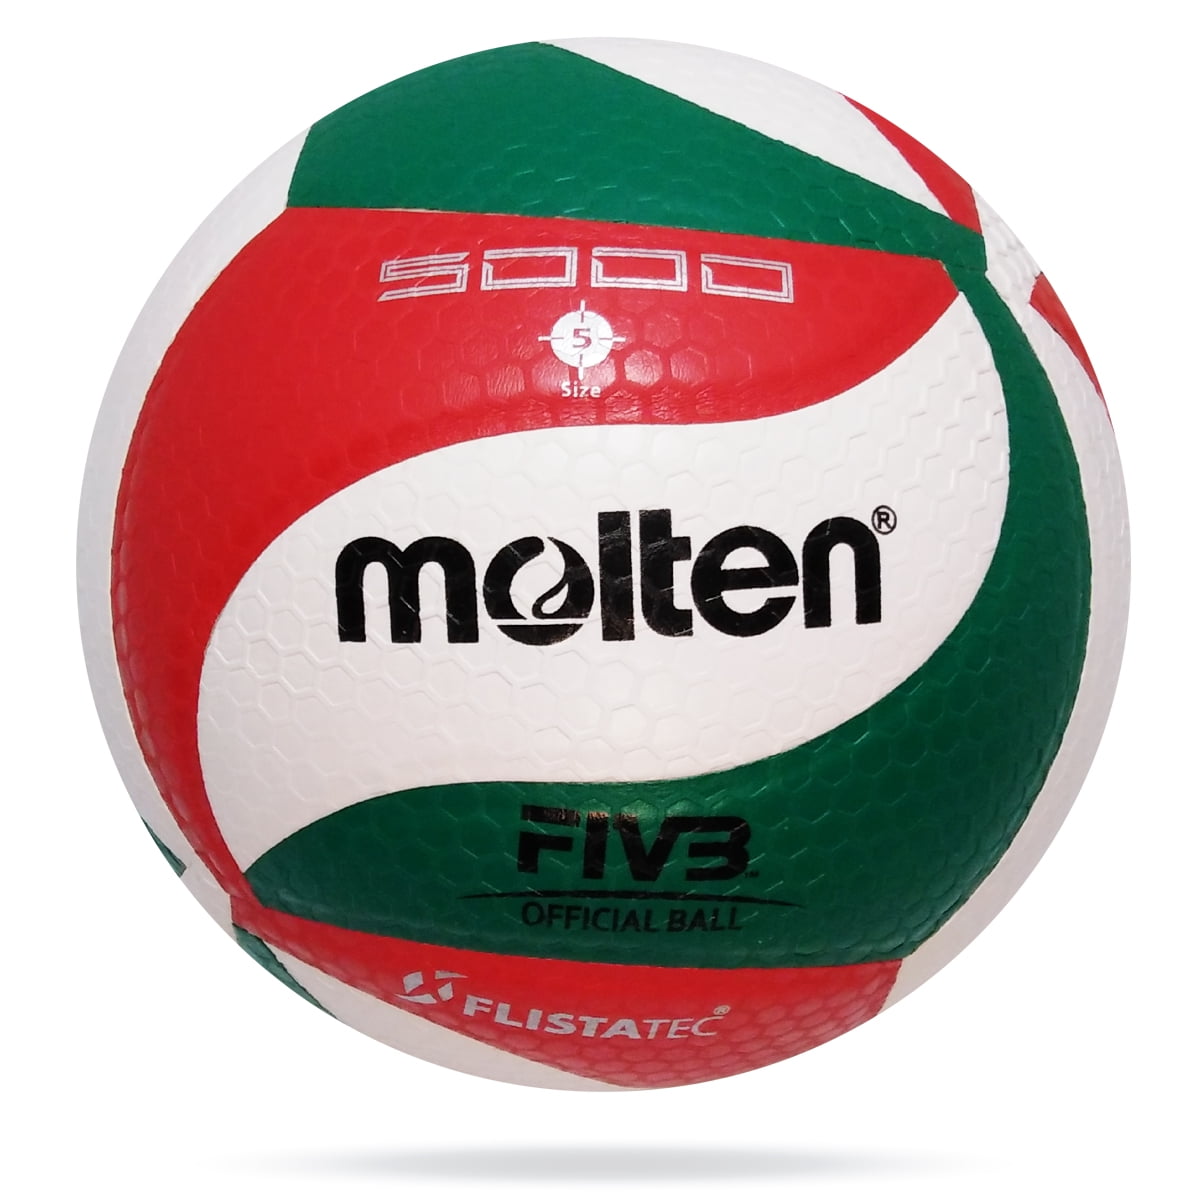 V5 M5000 Molten Volleyball PU Synthetic leather Soft Touch Sport Indoor Outdoor 